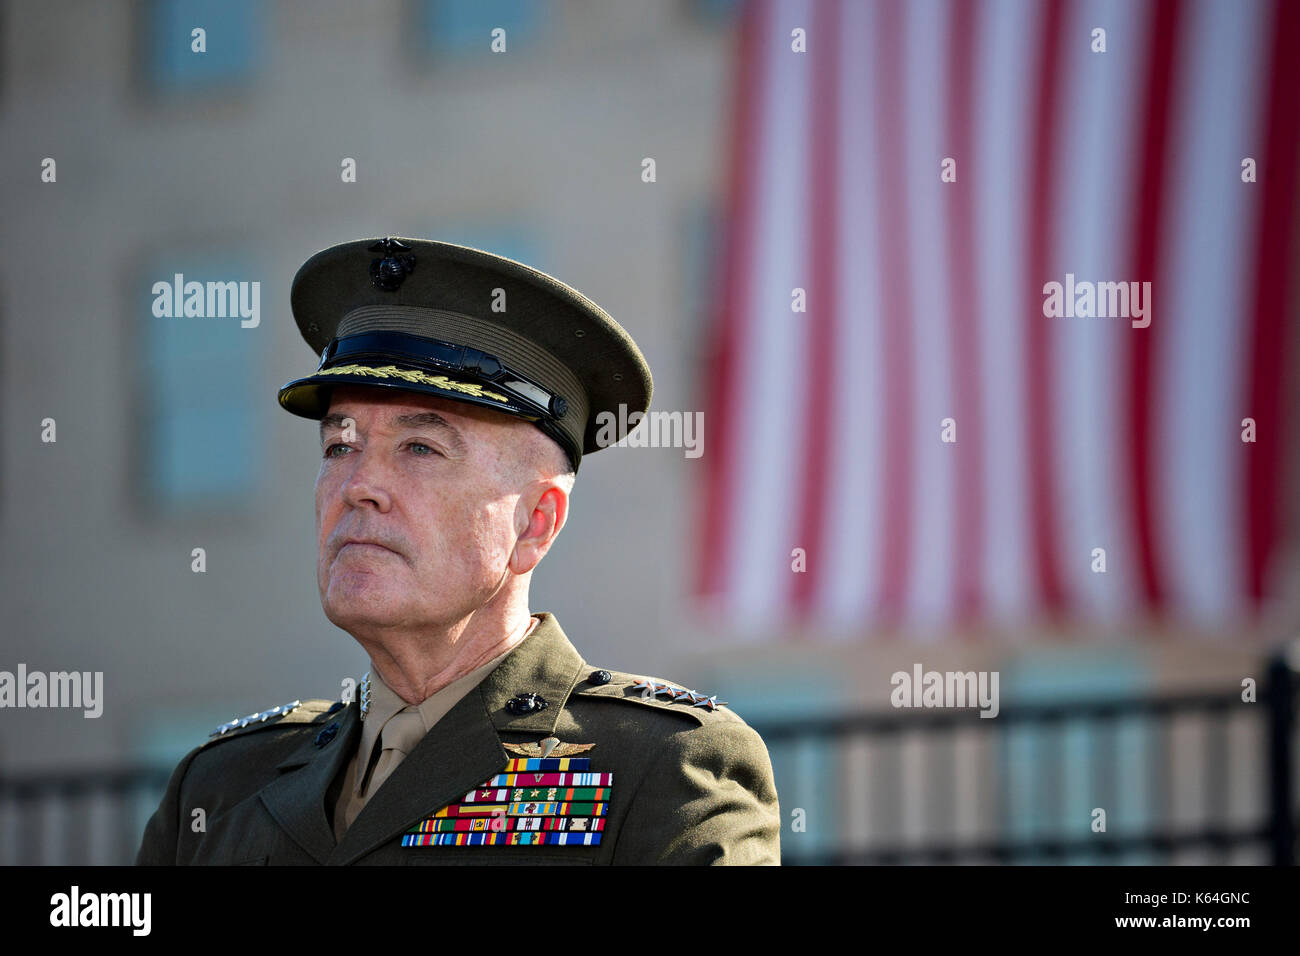 General Joseph Dunford, Chairman of the Joint Chiefs of Staff, listens during a ceremony to commemorate the September 11, 2001 terrorist attacks with U.S. President Donald Trump, not pictured, at the Pentagon in Washington, D.C., U.S., on Monday, Sept. 11, 2017. Trump is presiding over his first 9/11 commemoration on the 16th anniversary of the terrorist attacks that killed nearly 3,000 people when hijackers flew commercial airplanes into New York's World Trade Center, the Pentagon and a field near Shanksville, Pennsylvania.  Credit: Andrew Harrer / Pool via CNP /MediaPunch Stock Photo